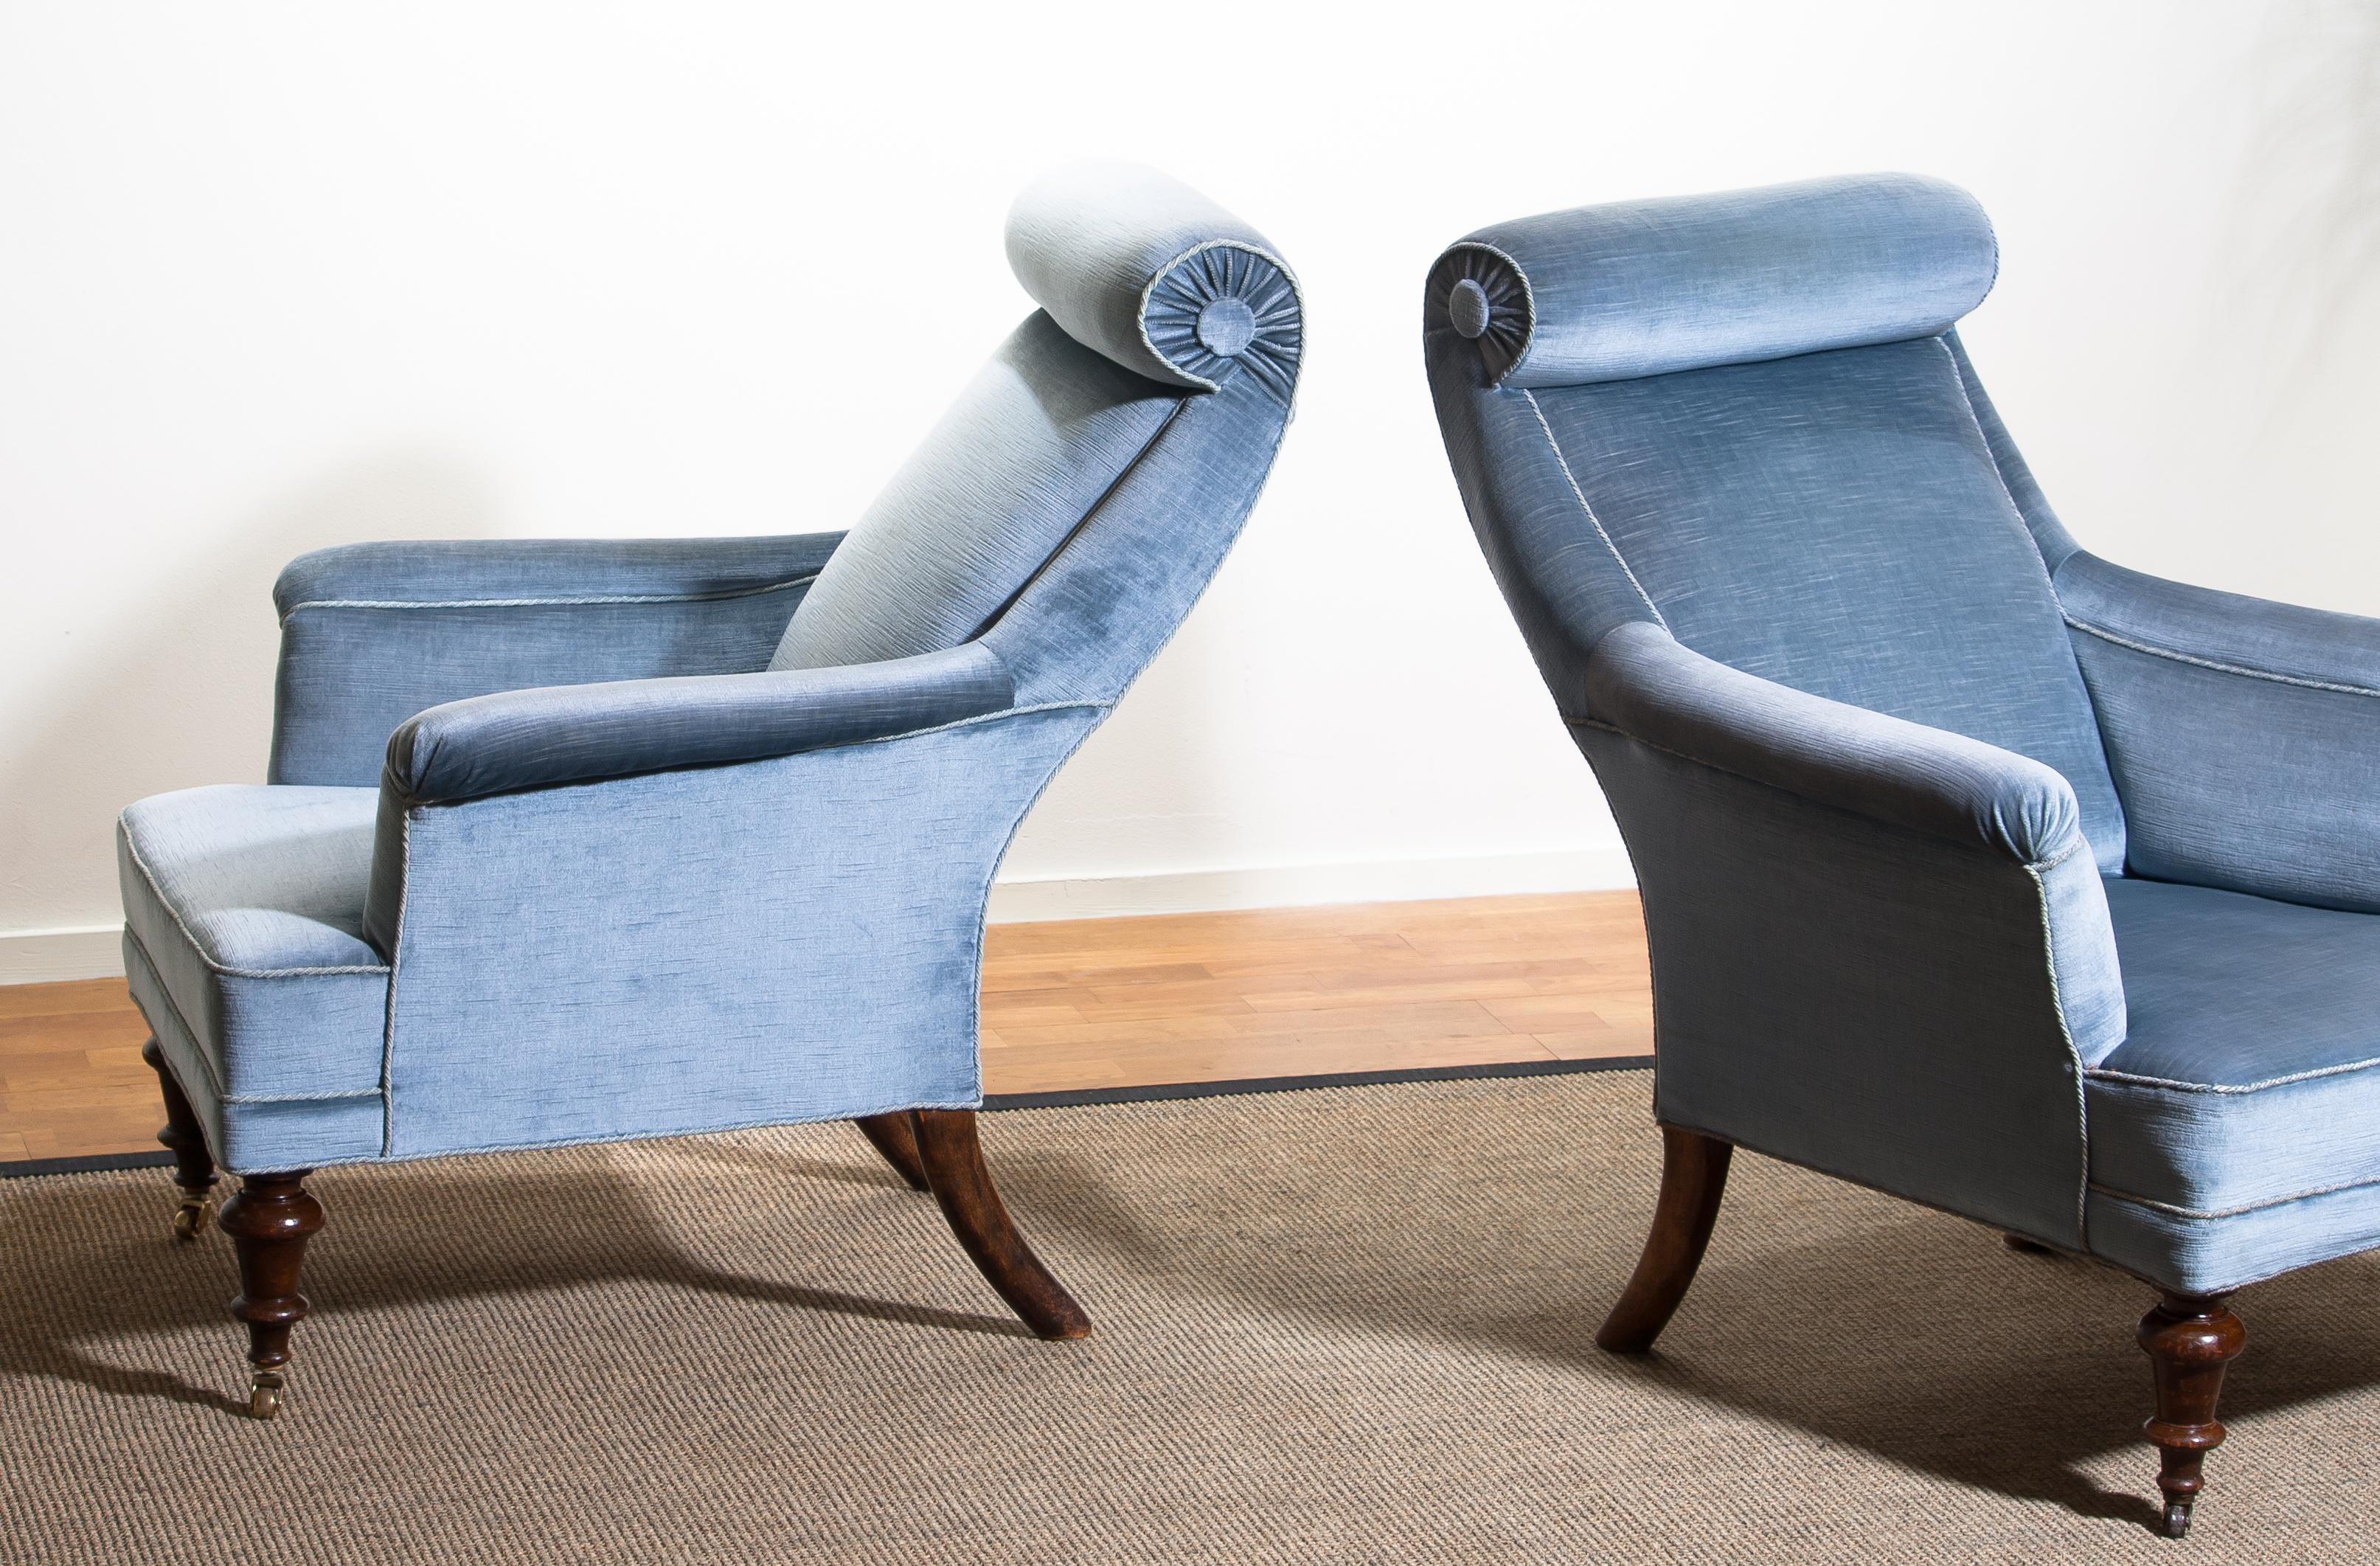 Rare and extremely comfortable or beautiful set of two bergère or lounge chairs in Dorothy Draper style from the turn to the 20th century.
Both chairs are upholstered in ice blue velvet and in good condition.

One chair has new wheels in brass